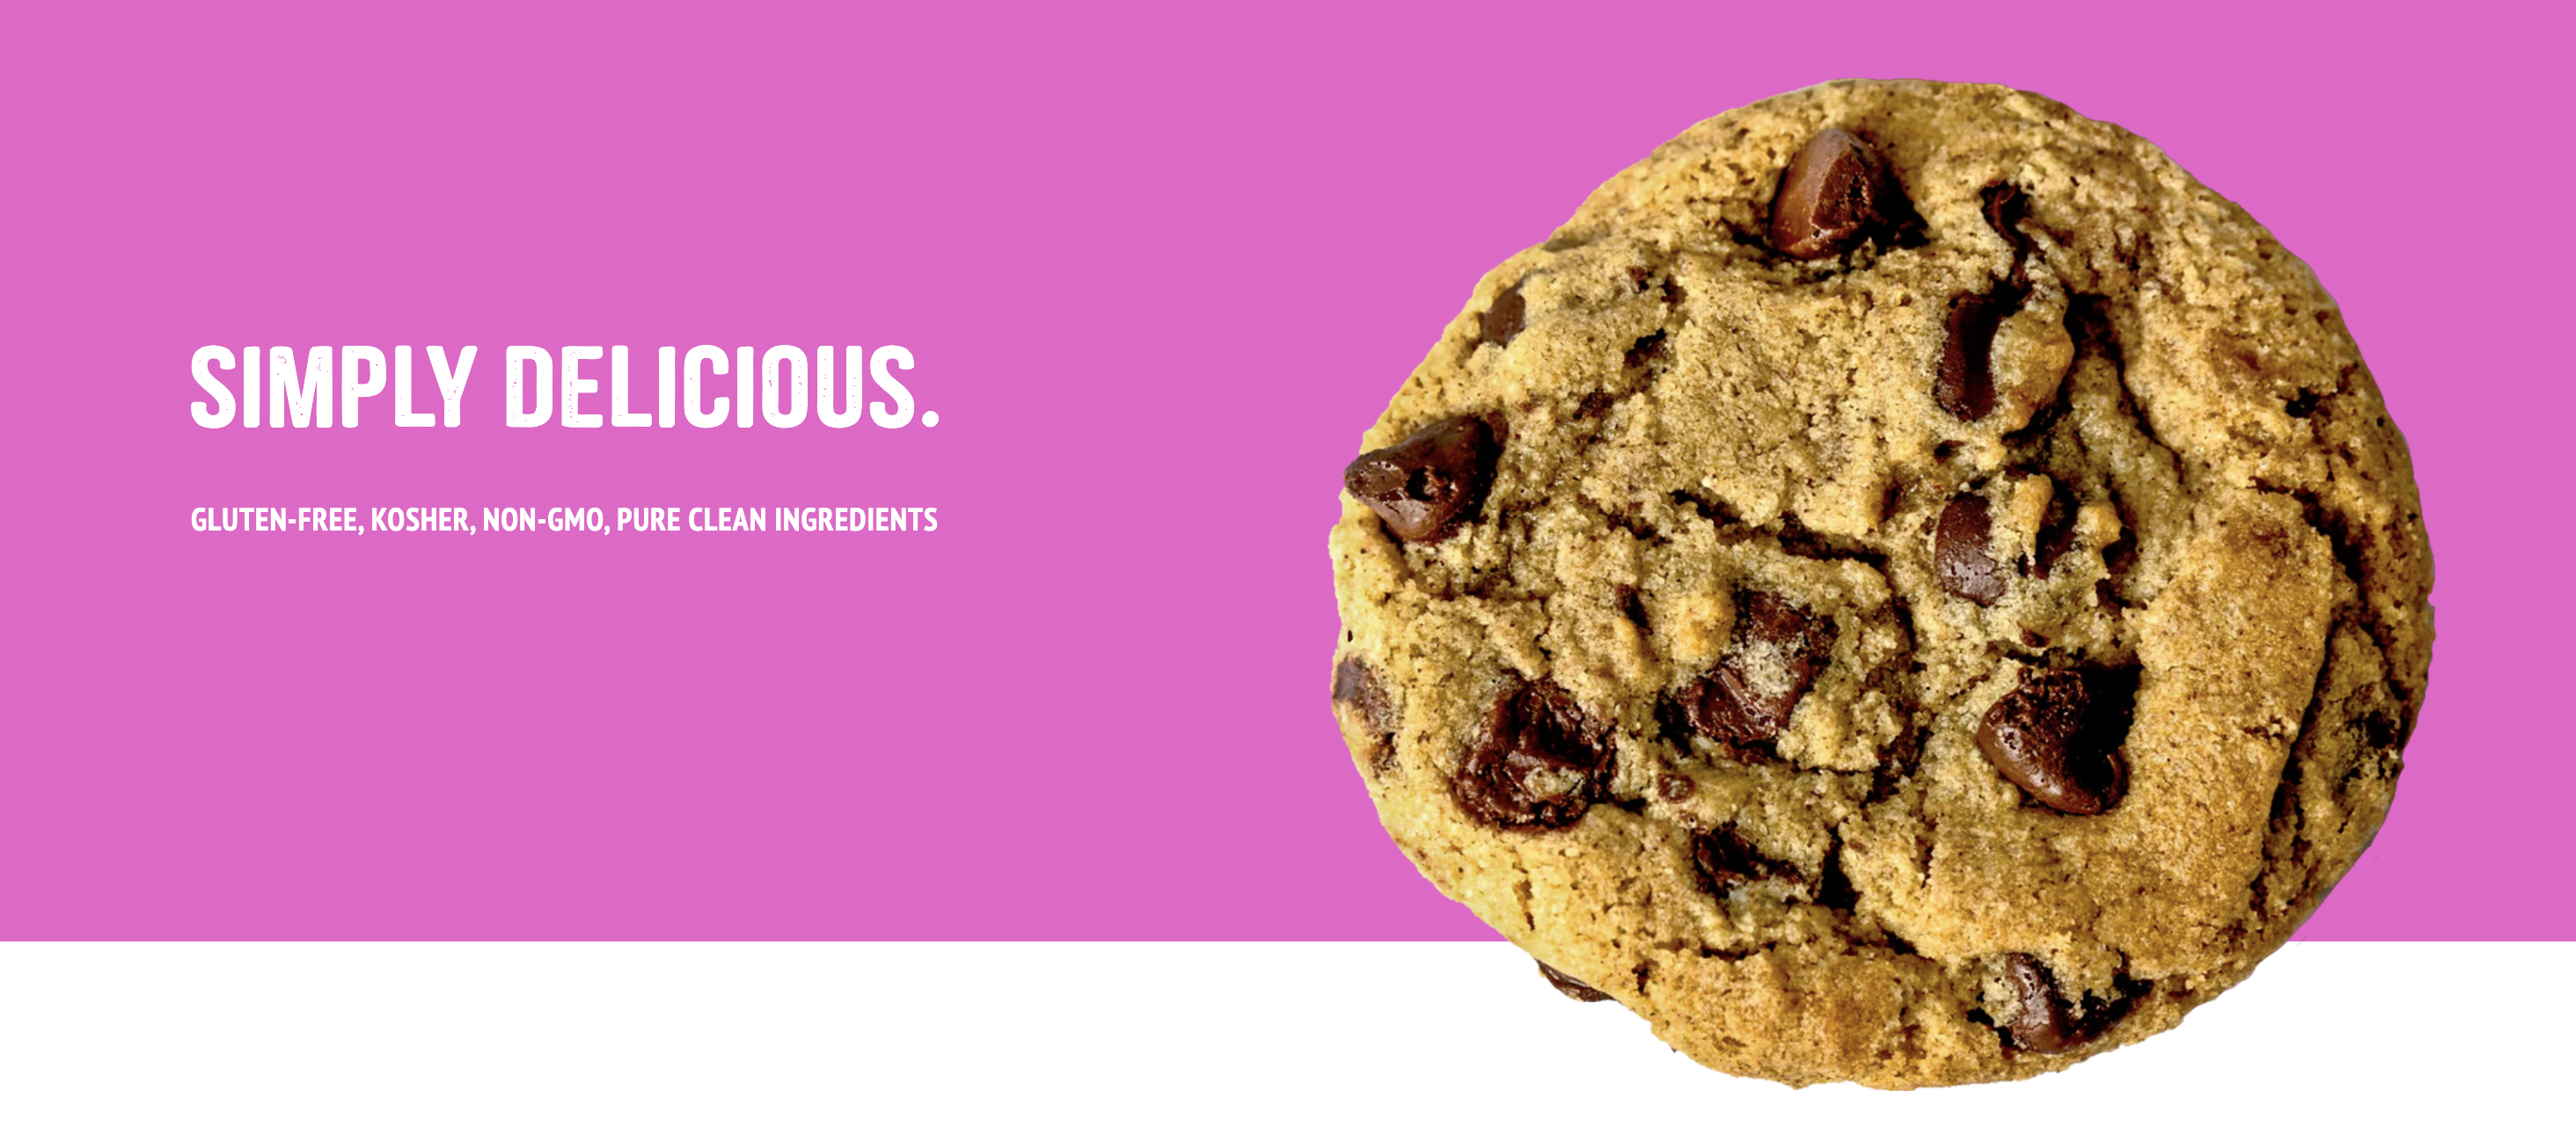 Mightylicious Vegan Cookies - A Healthy and Delicious Treat